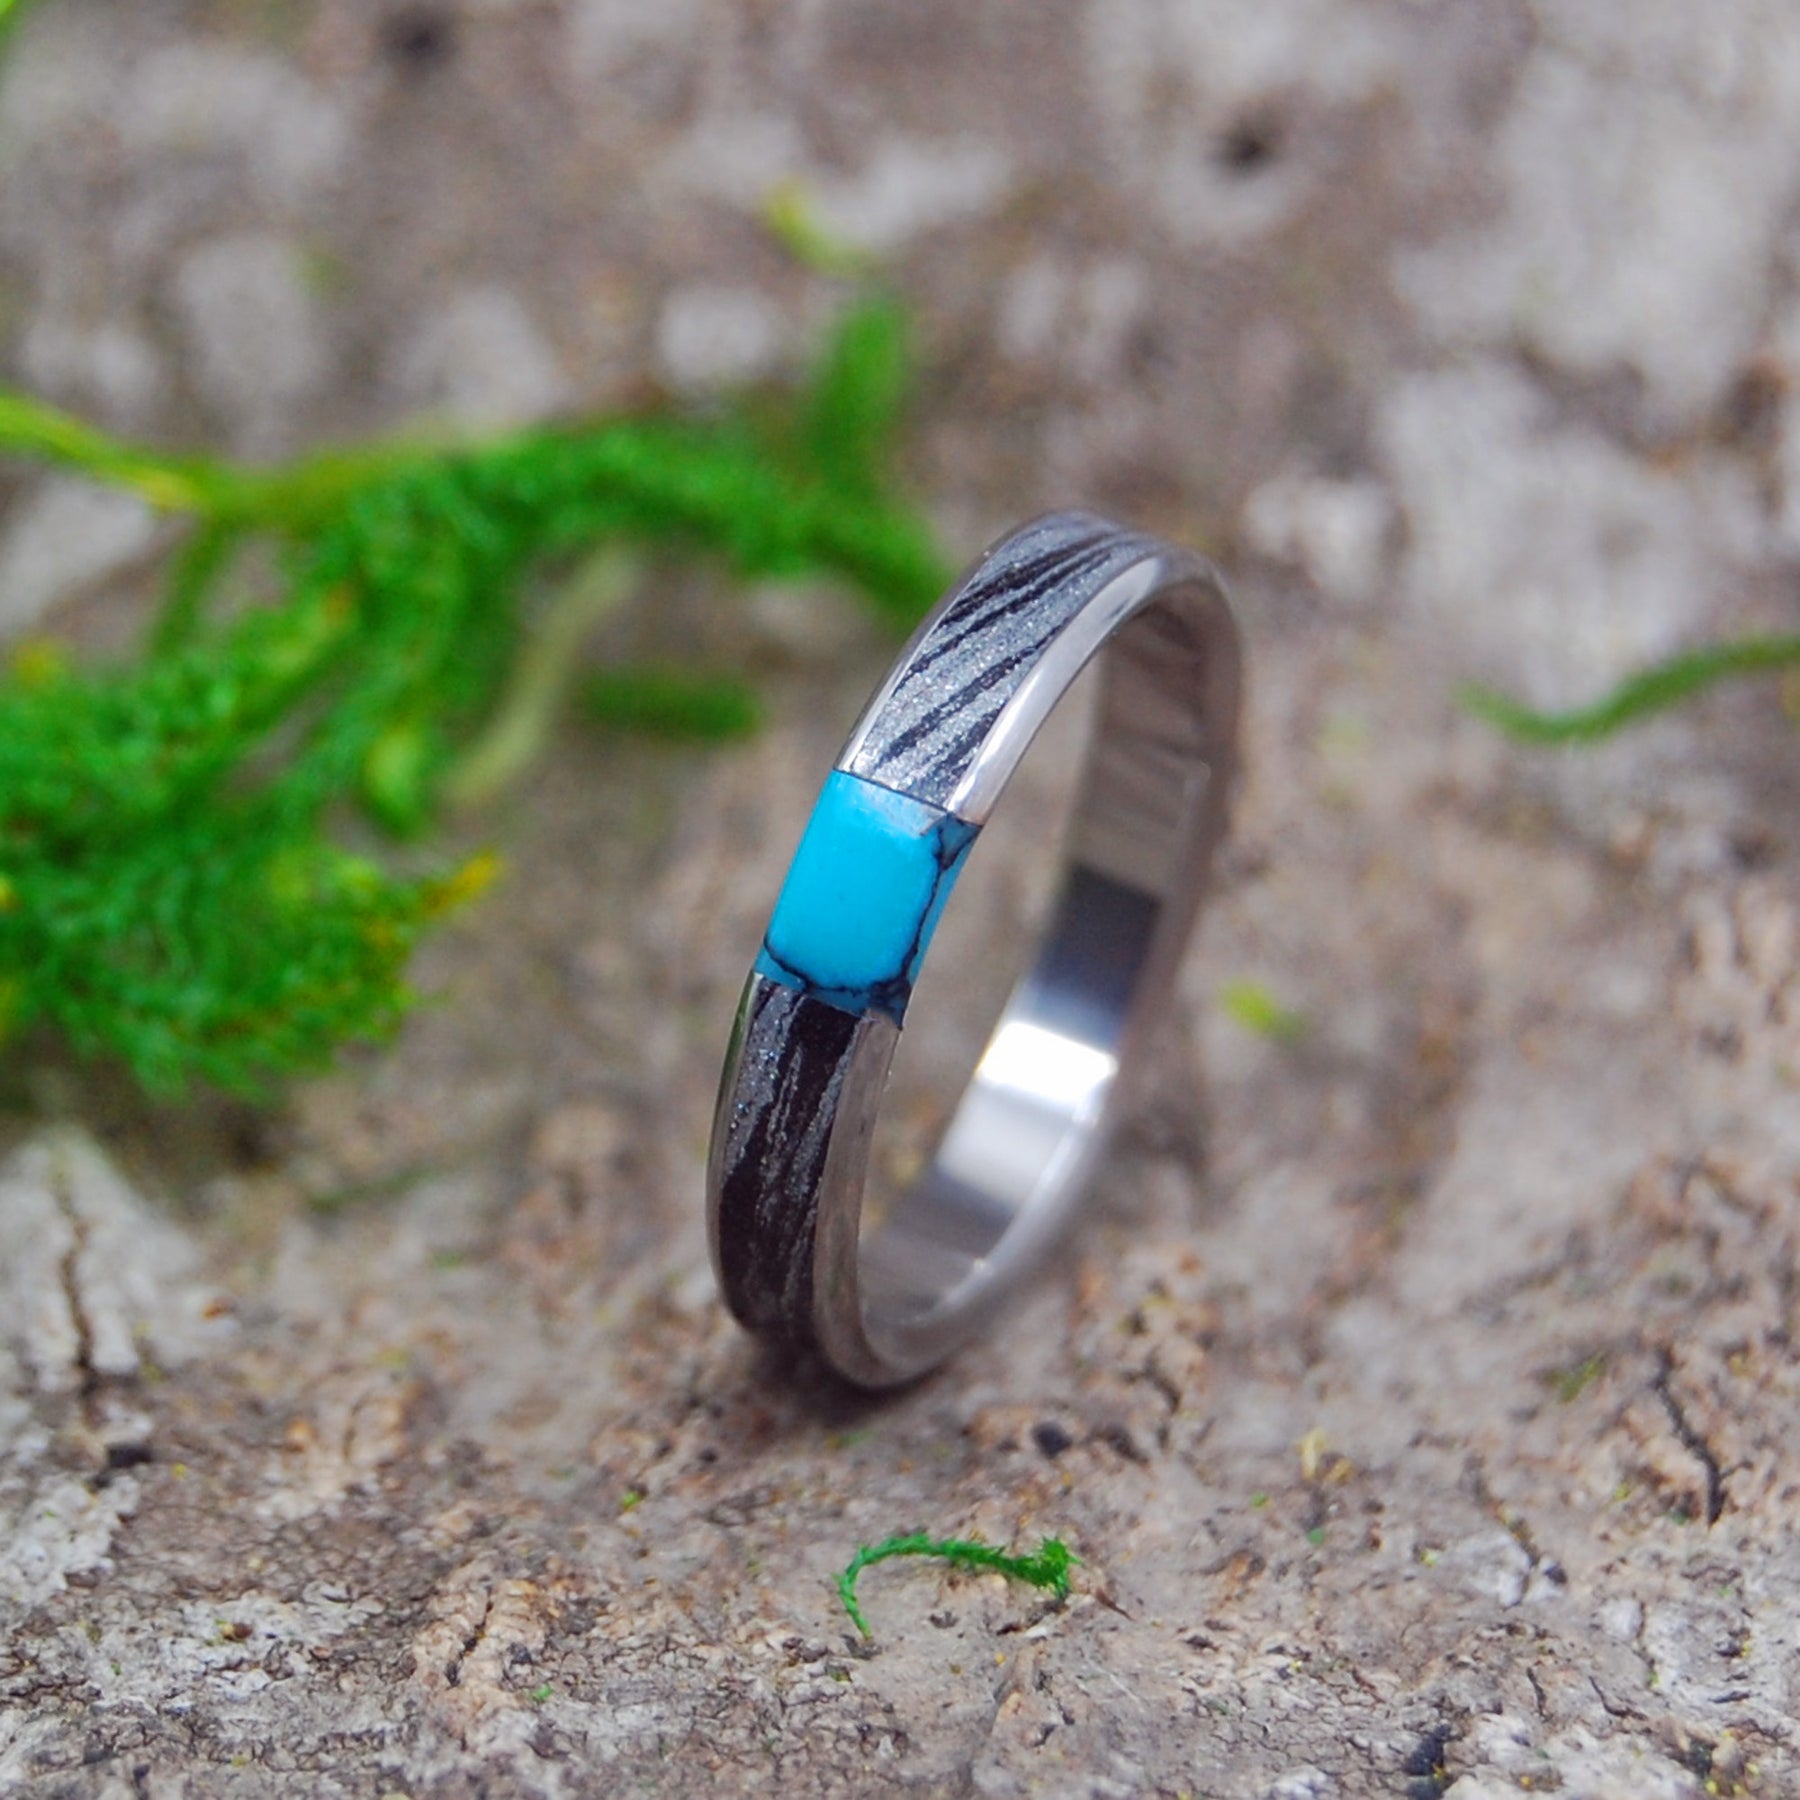 DESIRES WHIRLWIND TURQUOISE | M3 & Turquoise Titanium Women's Wedding Engagement Rings - Minter and Richter Designs